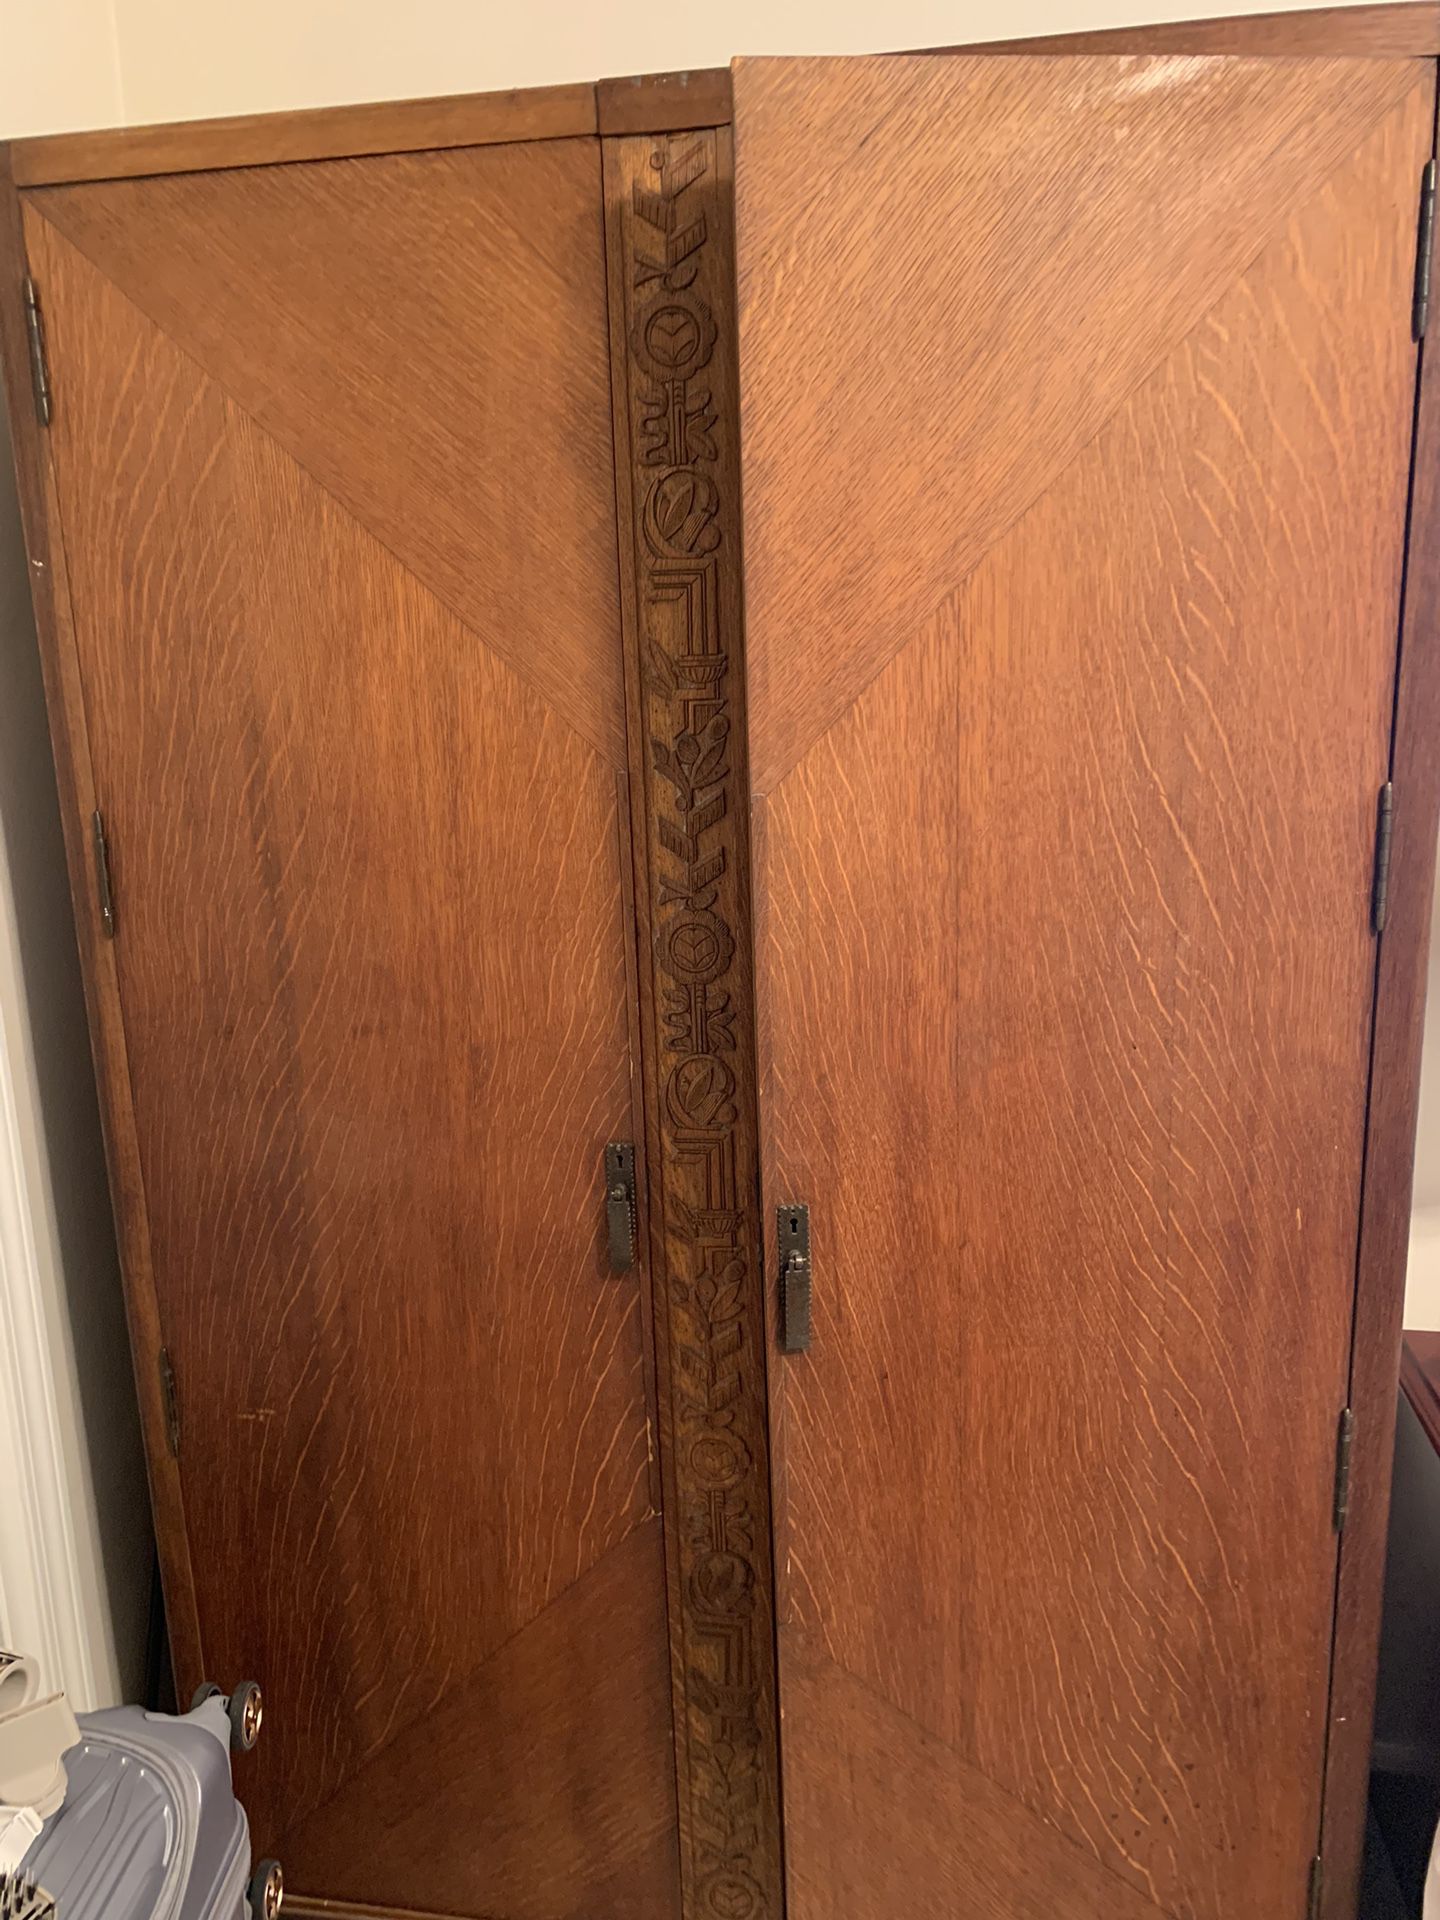 Best Offer Wins. Antique Armoire With Original Key And Hardware!